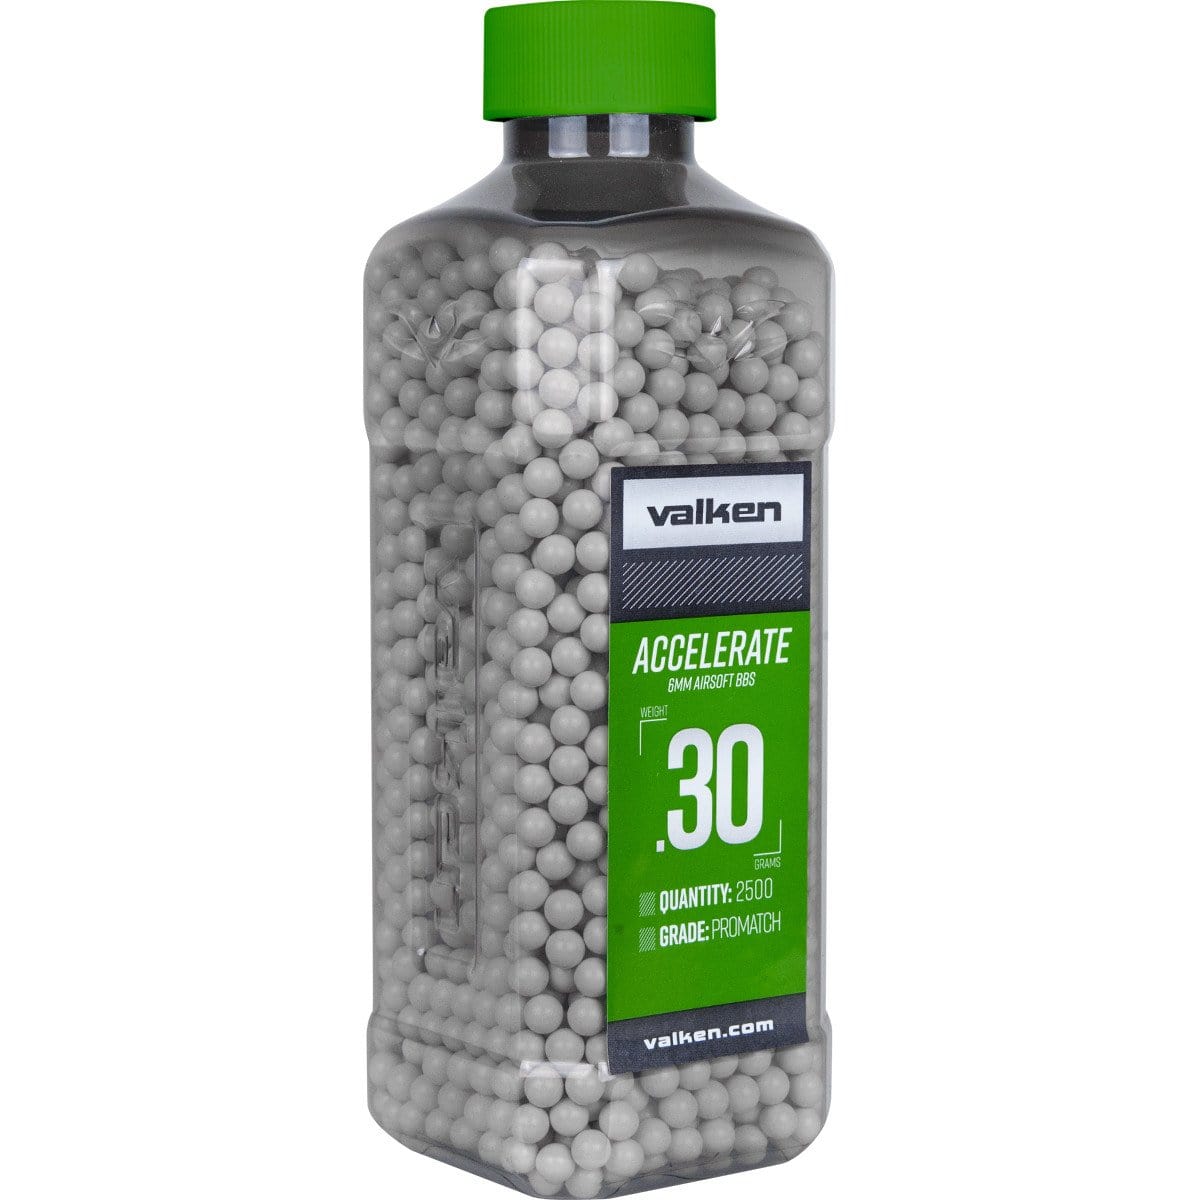 Valken Accelerate Airsoft BBs - 0.30G-2500CT-White - Eminent Paintball And Airsoft